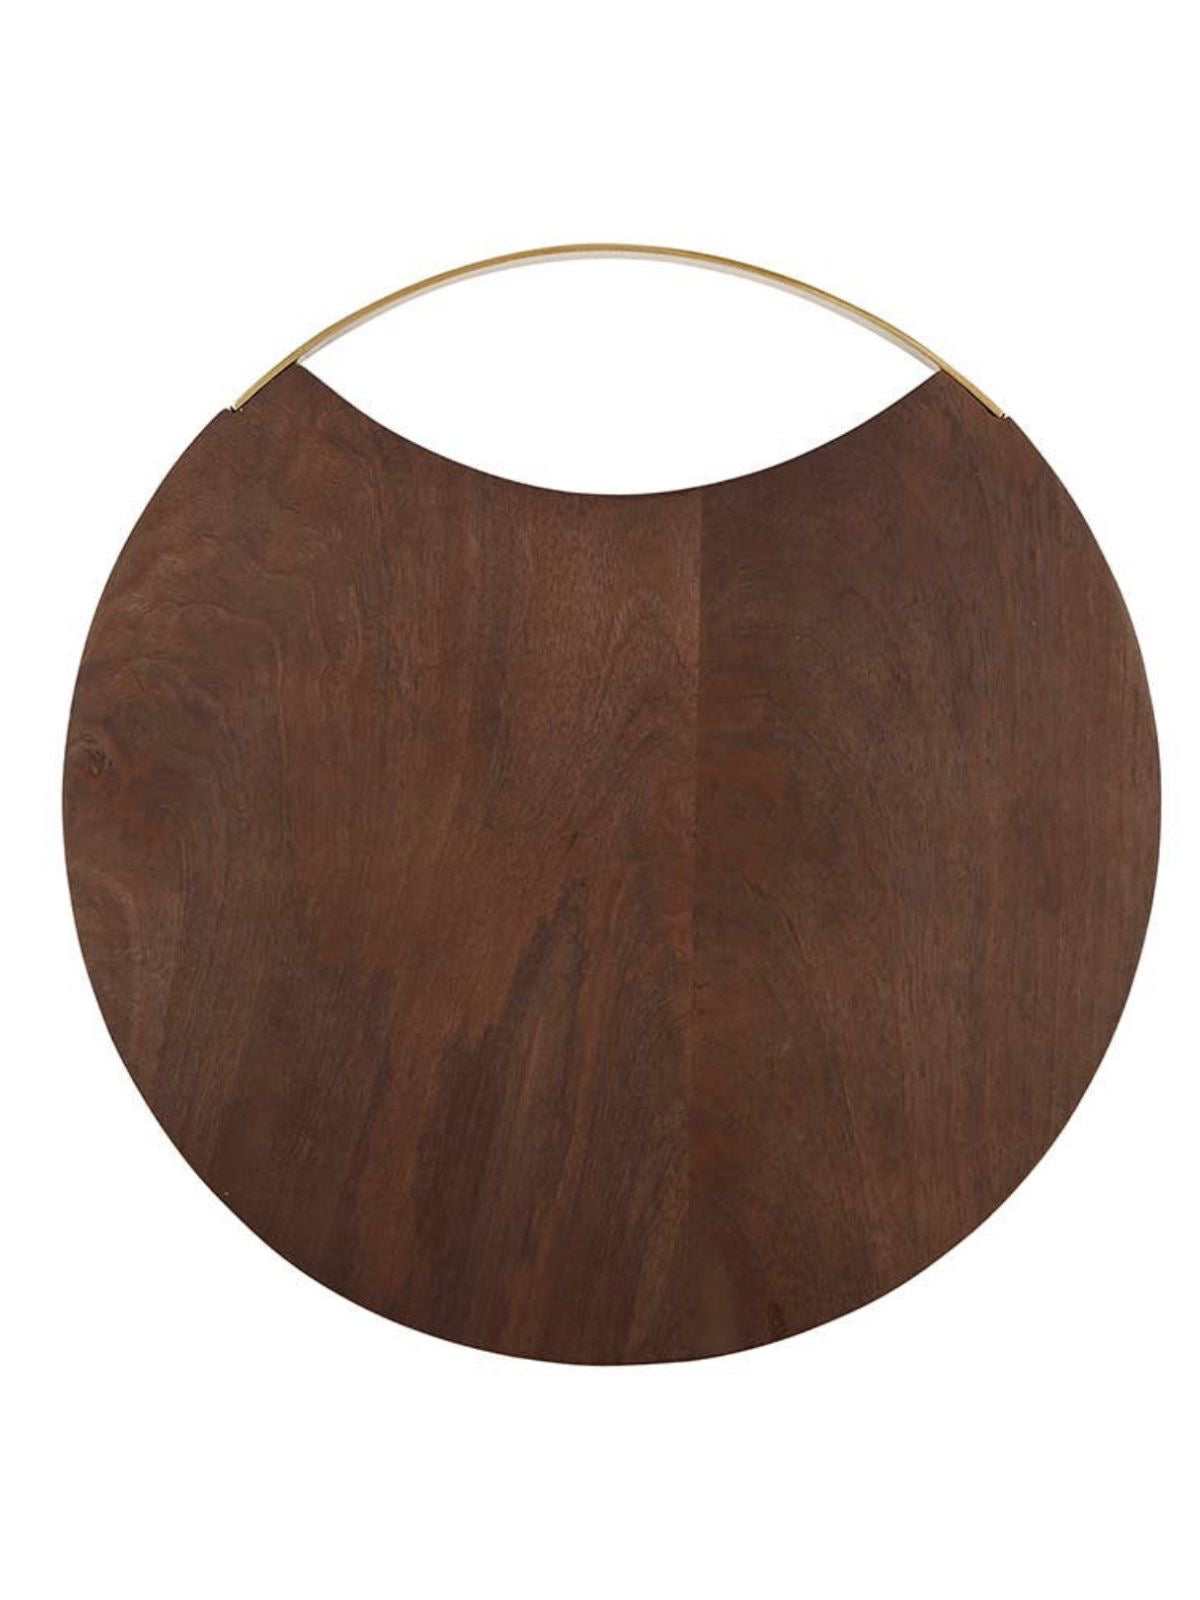 12D Round Mango Wood Serving Board with Brass Handle.